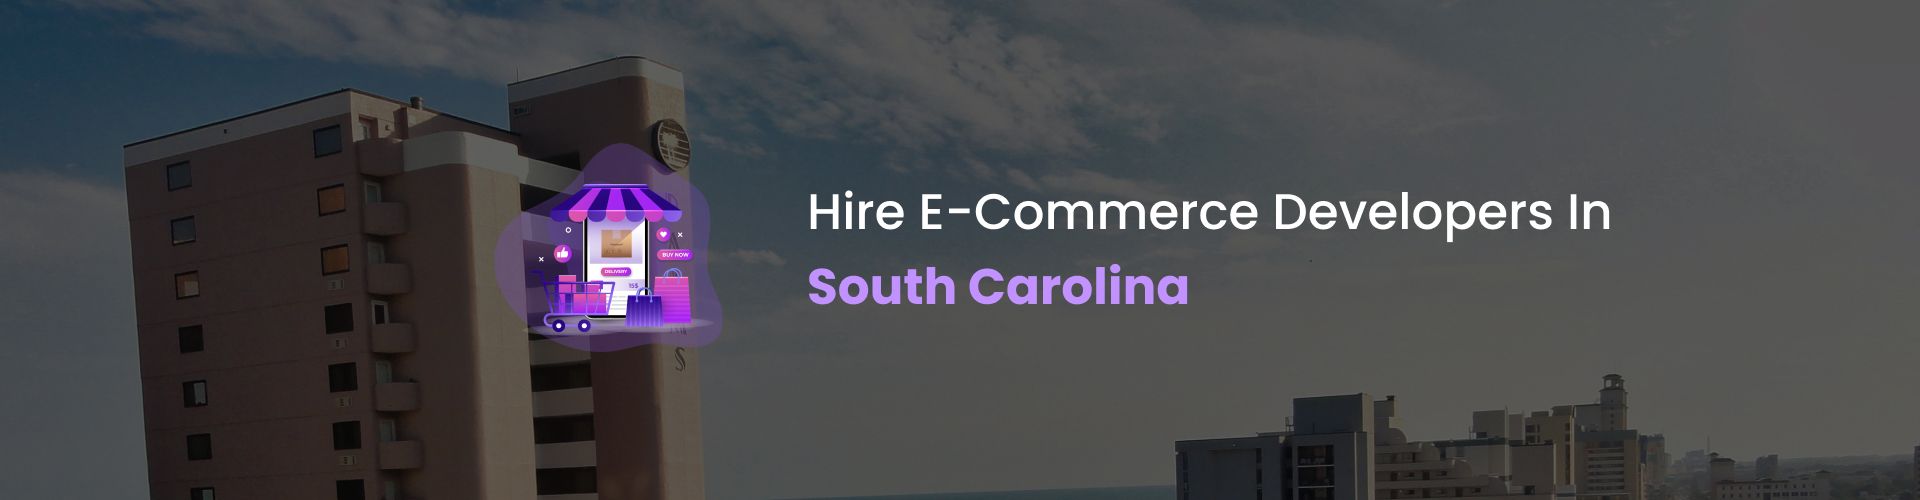 hire ecommerce developers in south carolina